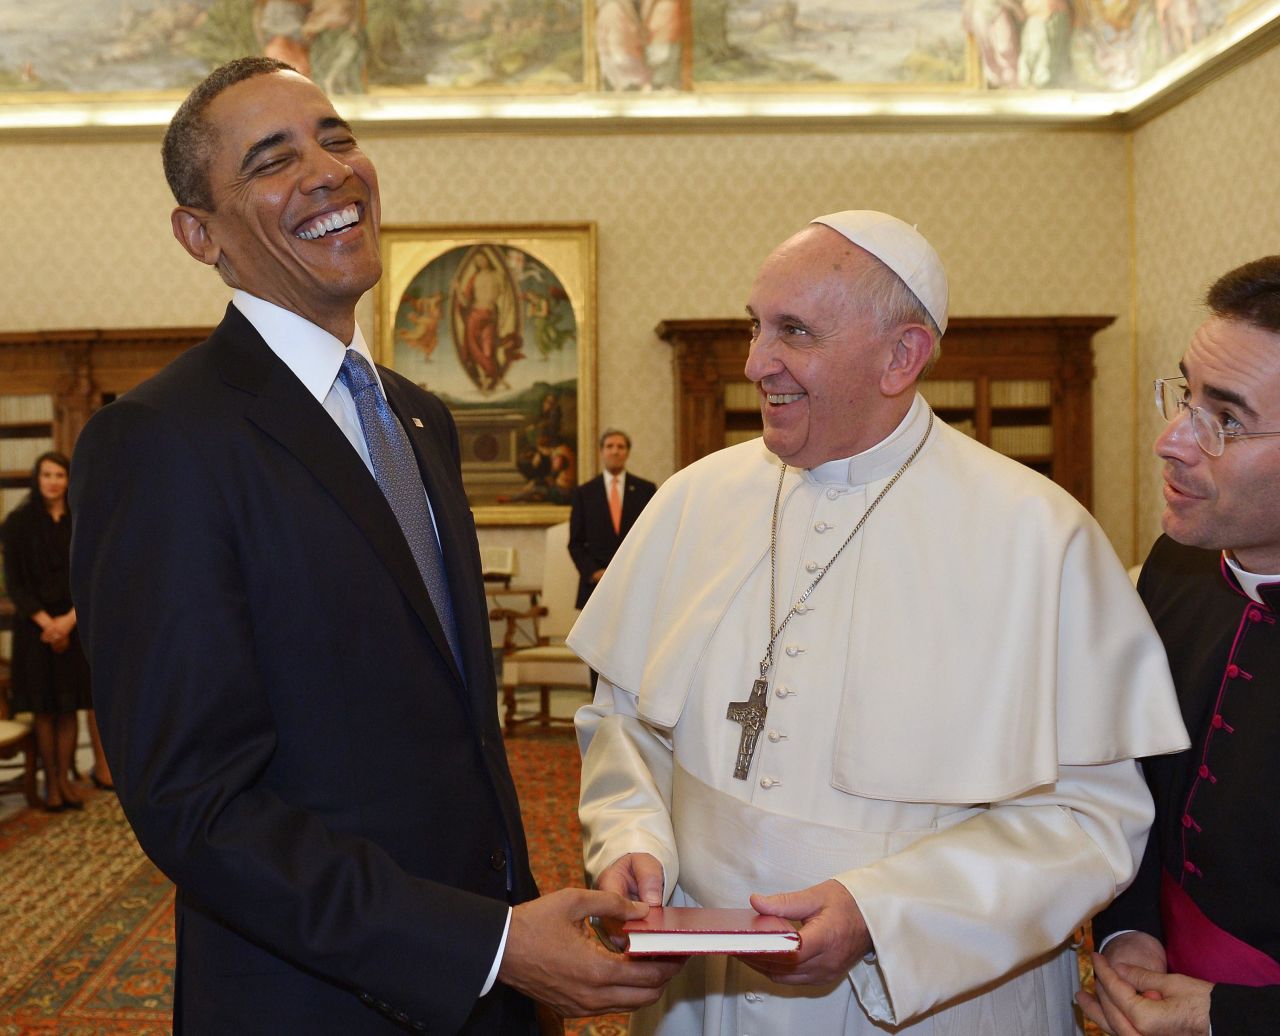 Pope Francis and President Barack Obama exchange gifts during a private audience at the Vatican in 2014.